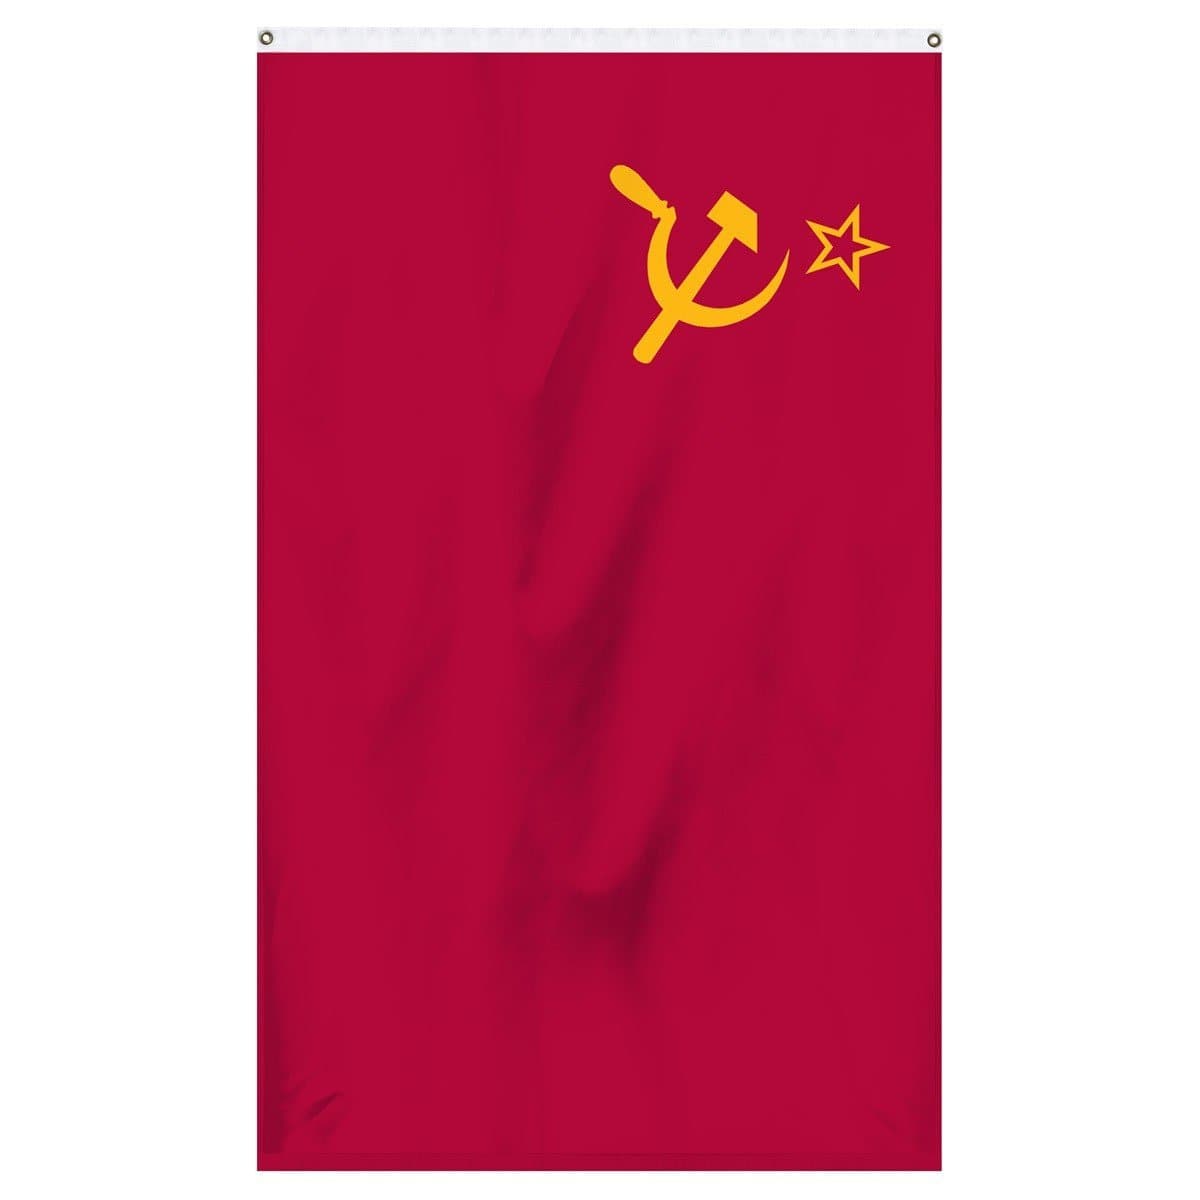 USSR National flag for sale to buy online from the American company Atlantic Flag and Pole. Red flag with yellow hook and sickle with yellow star.